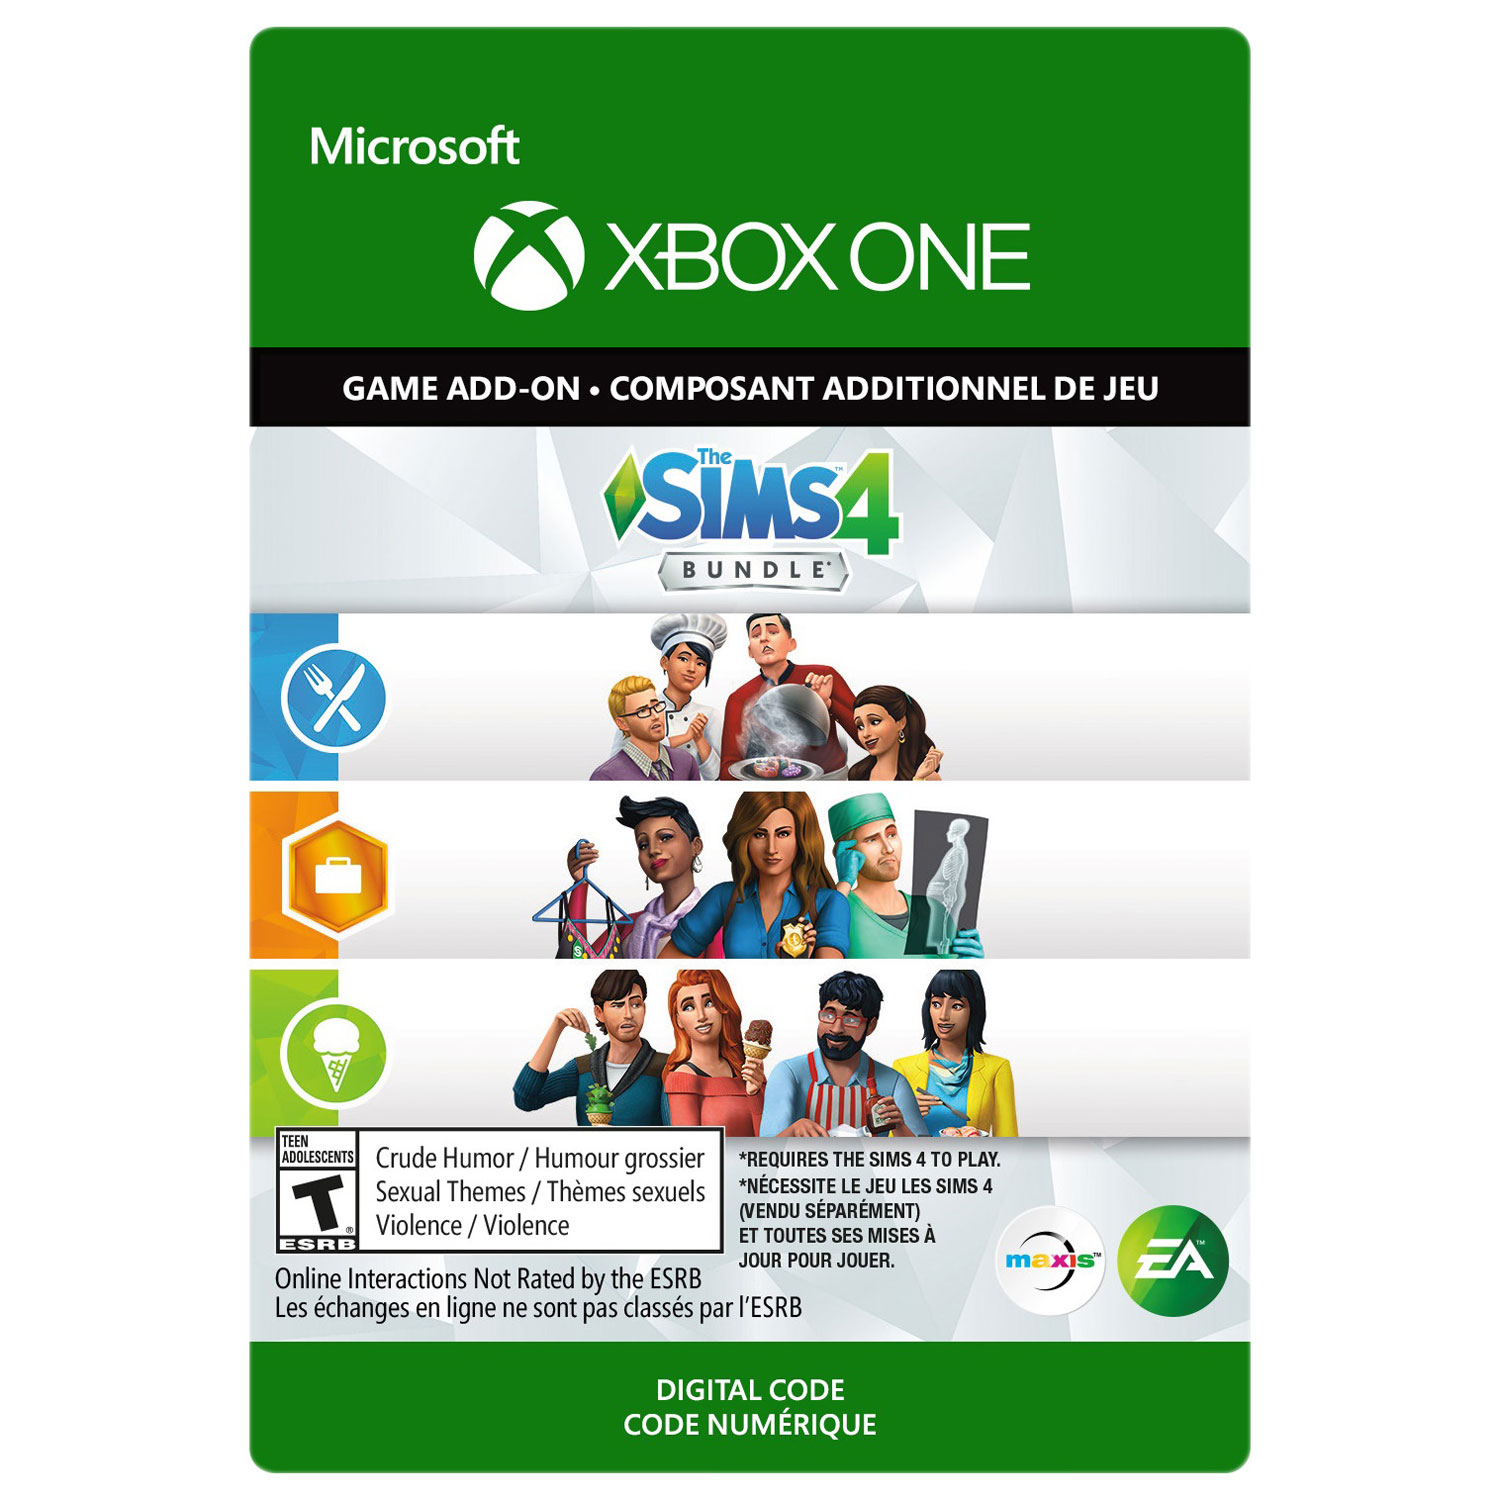 The Sims 4 Bundle (Xbox One) - Digital Download